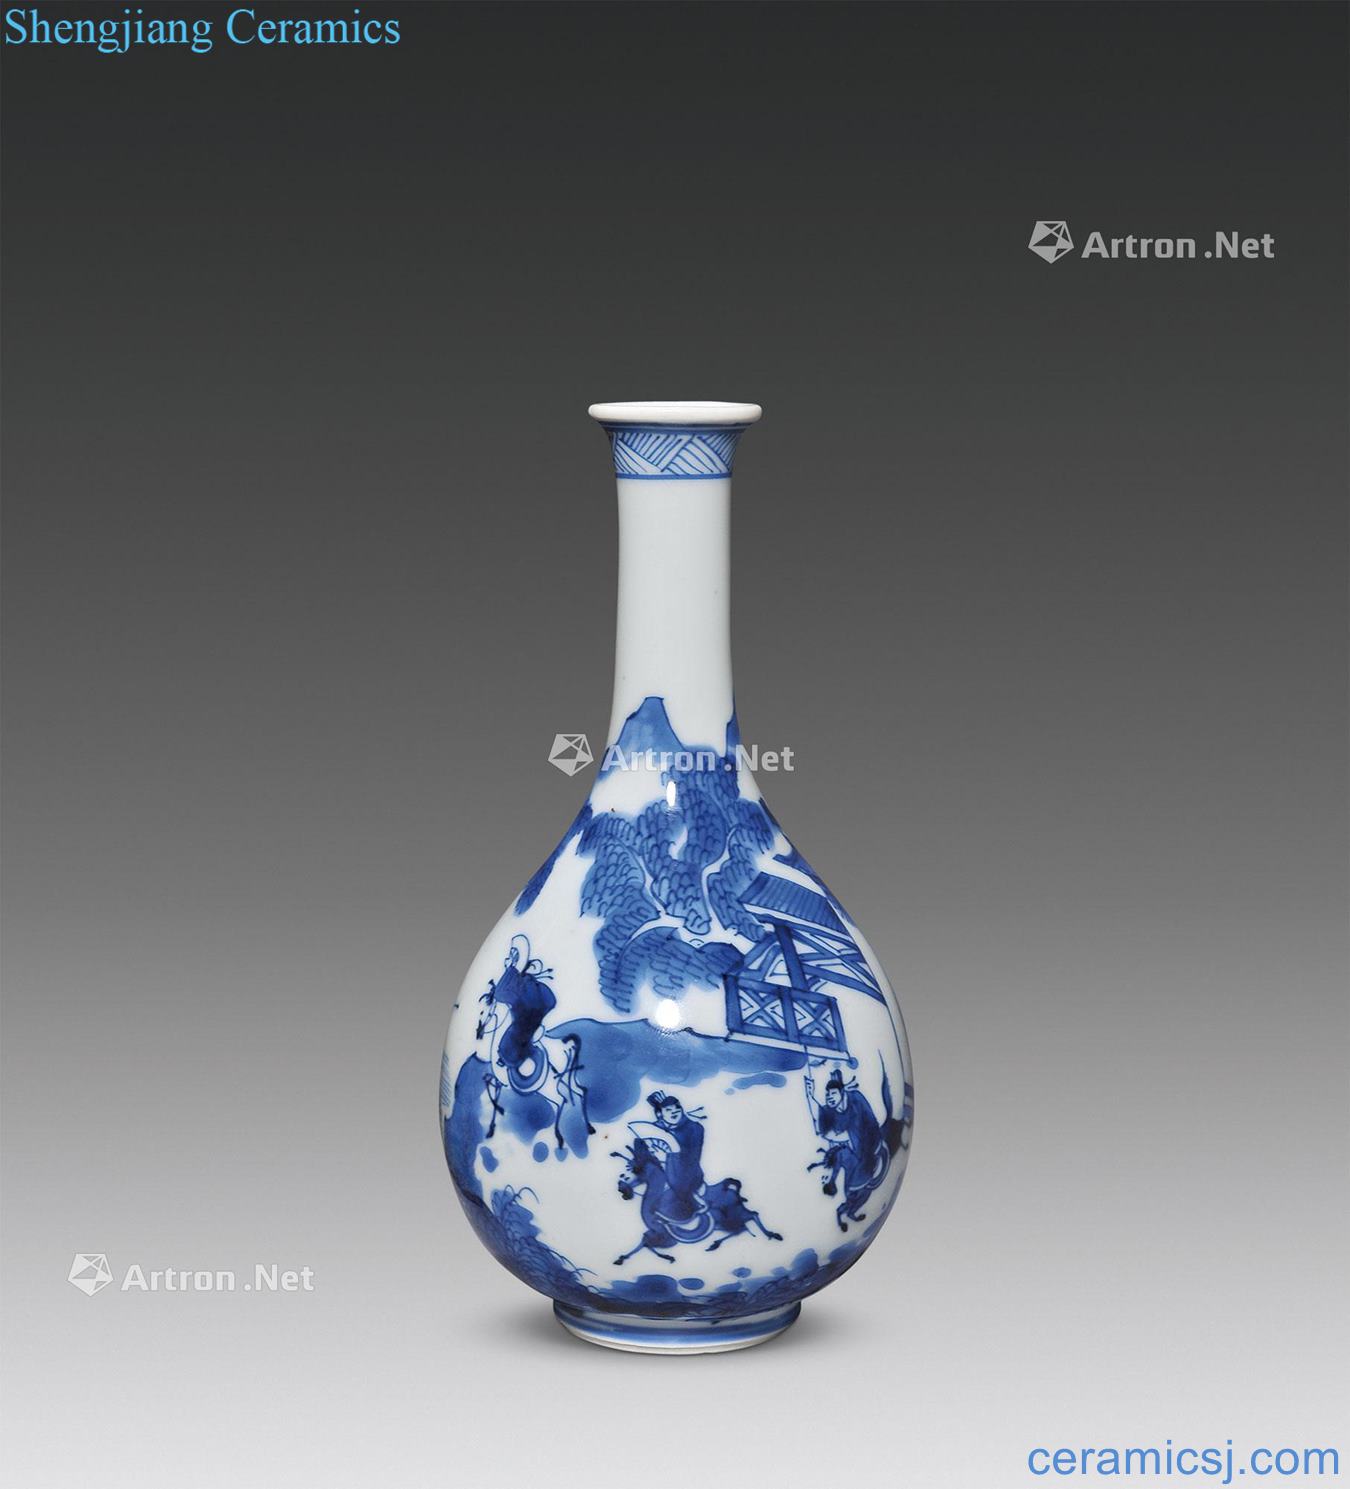 The qing emperor kangxi character lines the flask